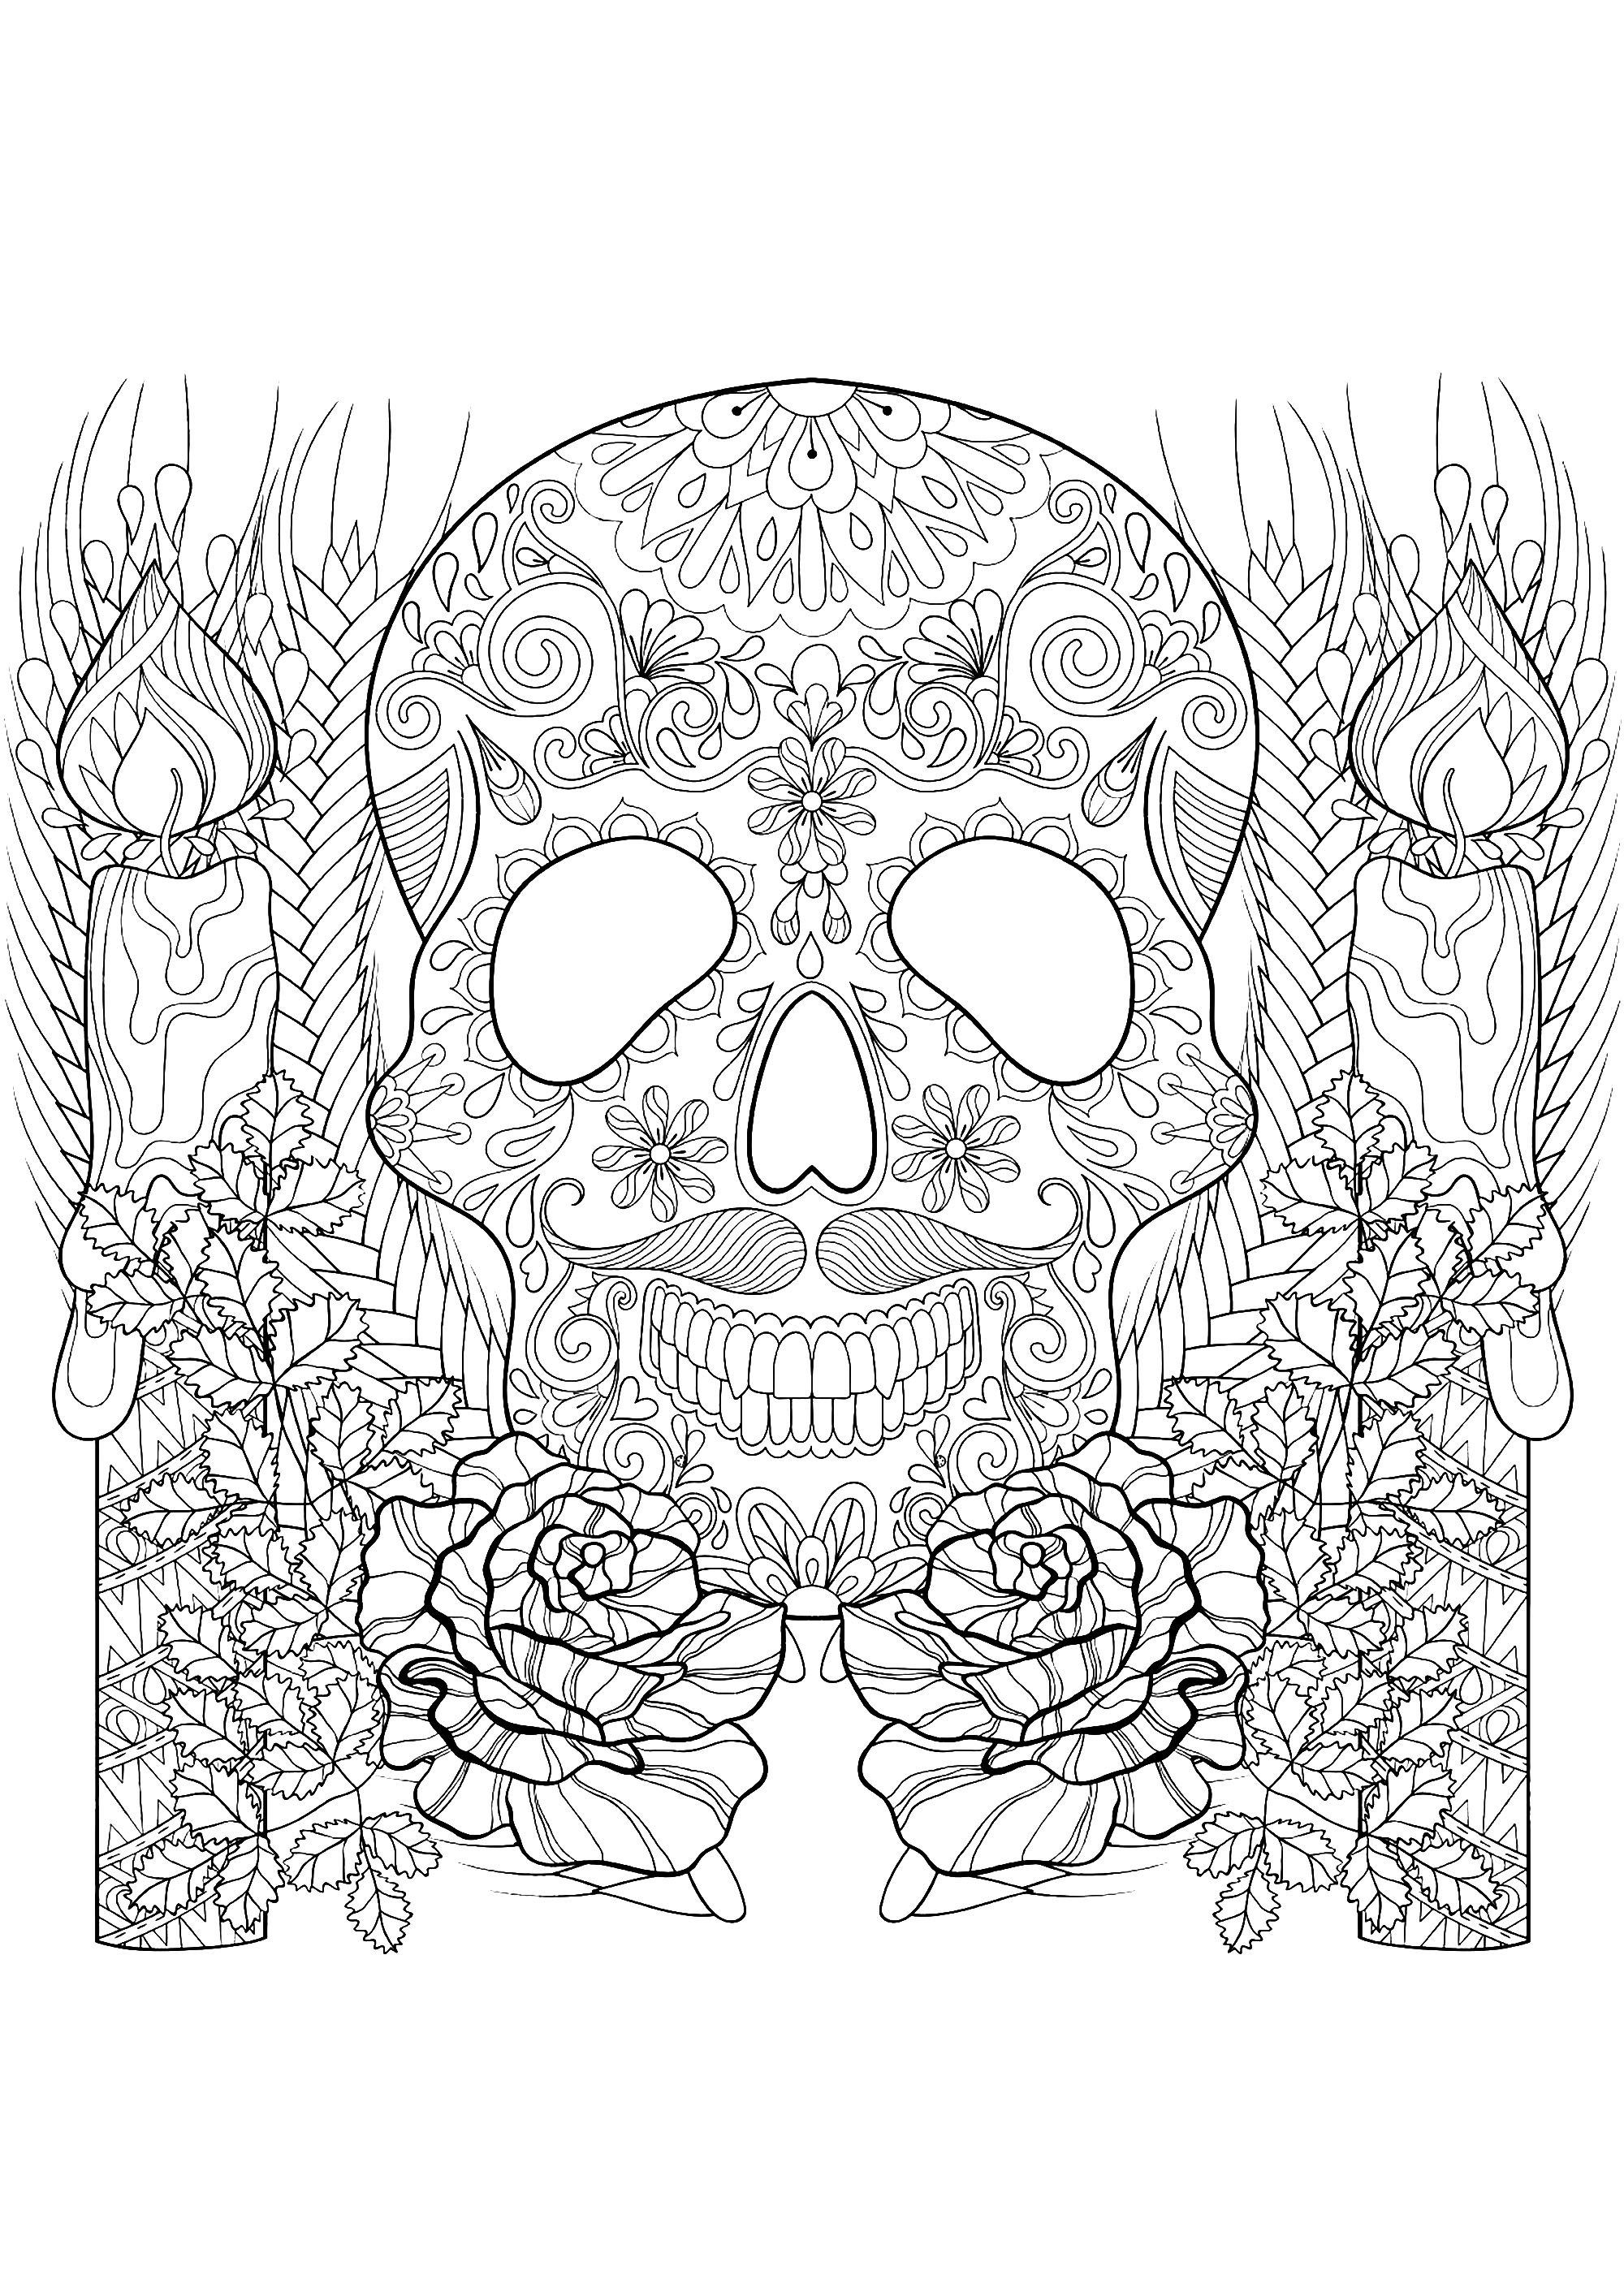 Skull Color Pages Skull Coloring Pages For Adults